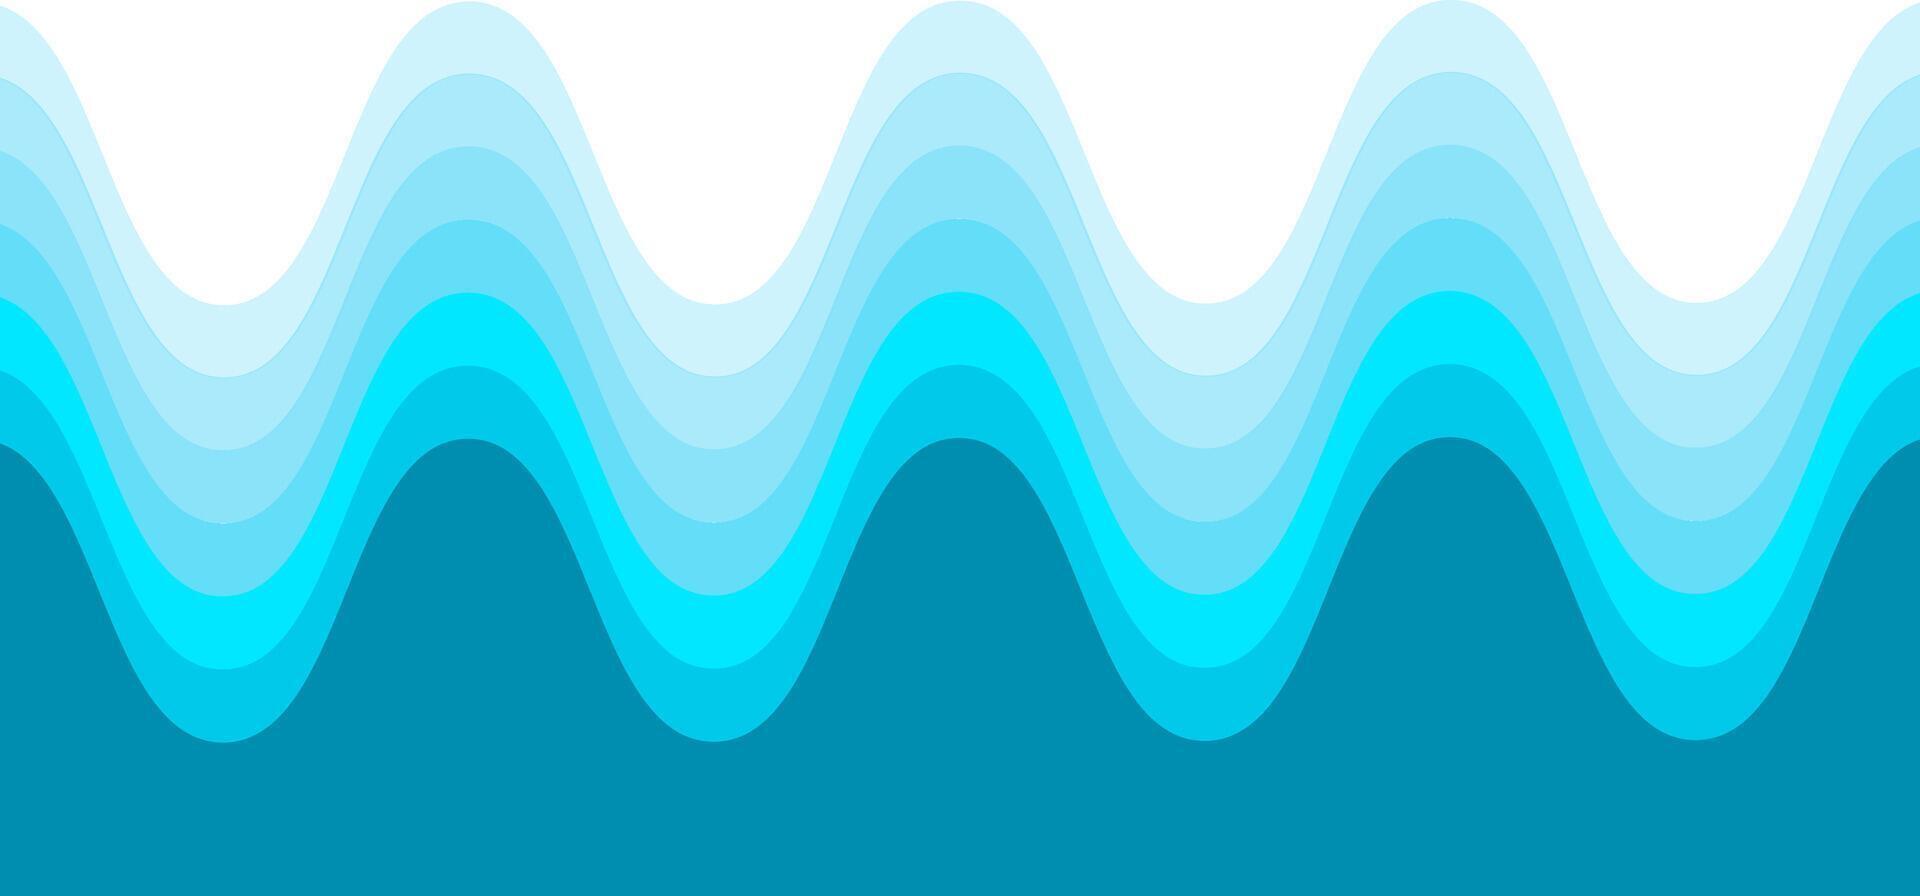 Wave abstract background design vector